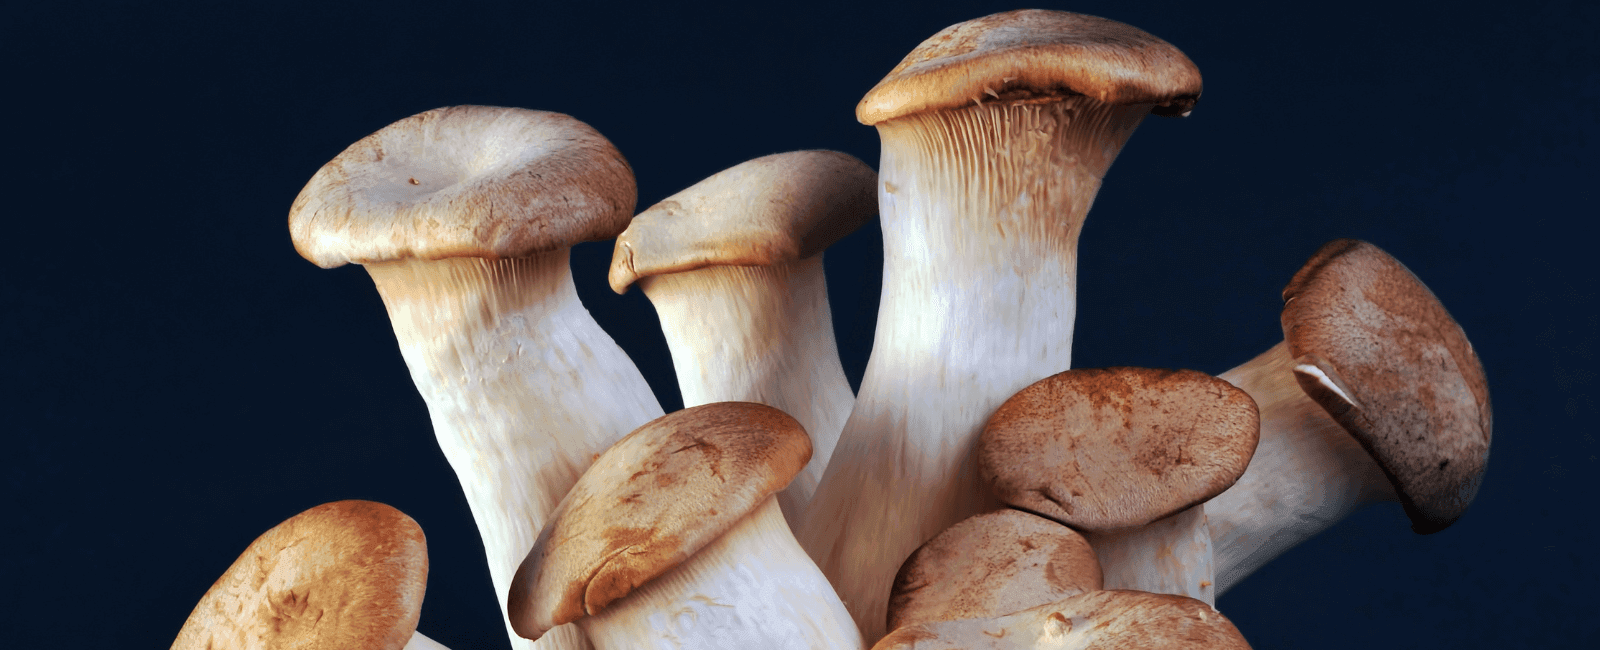 New Research Highlights Weight Management Benefits of King Oyster Mushroom